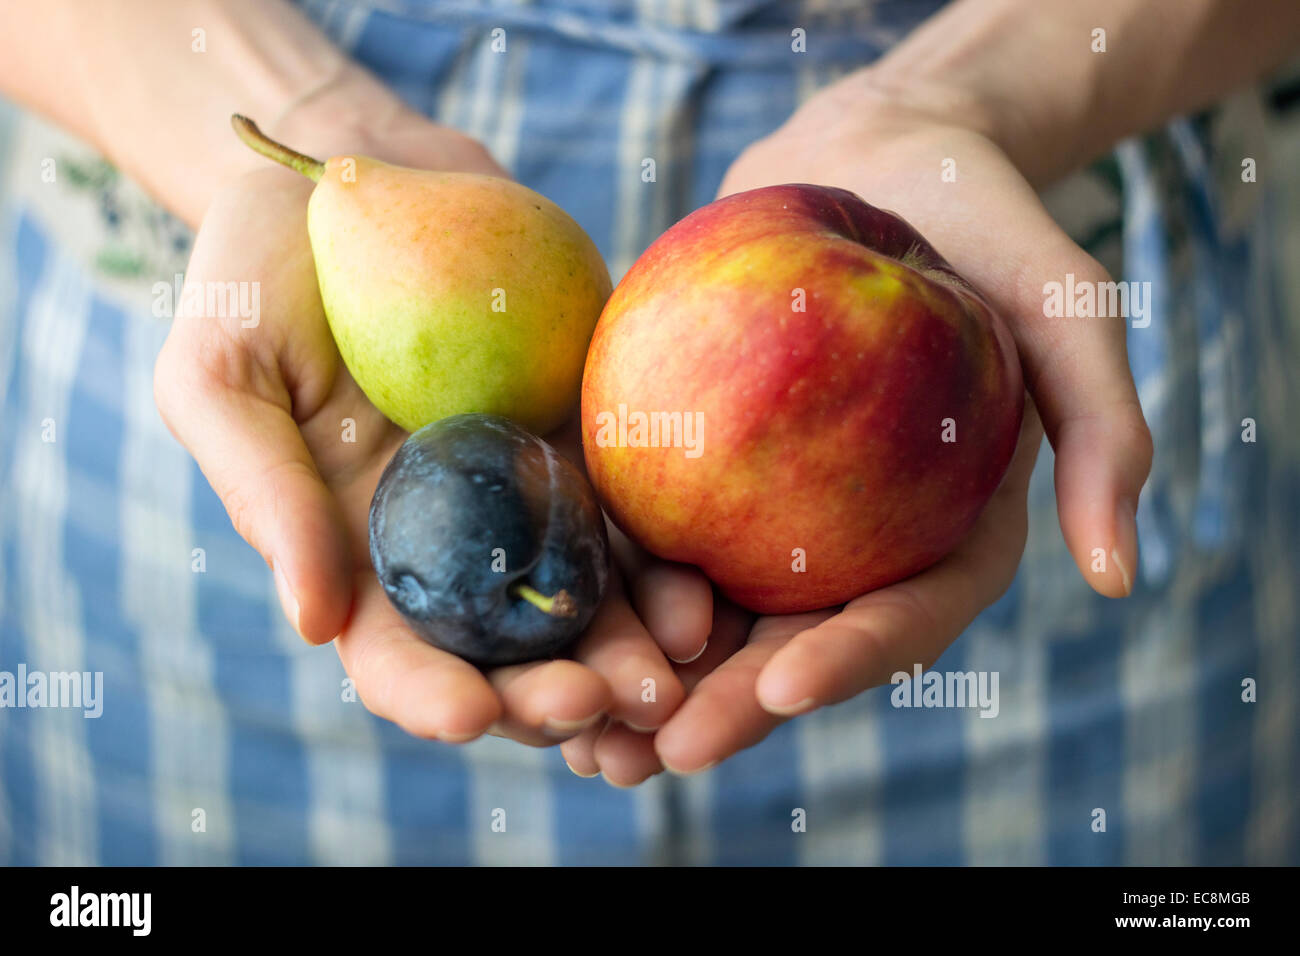 Hands holding organic fruit. Plum, apple and pear Stock Photo